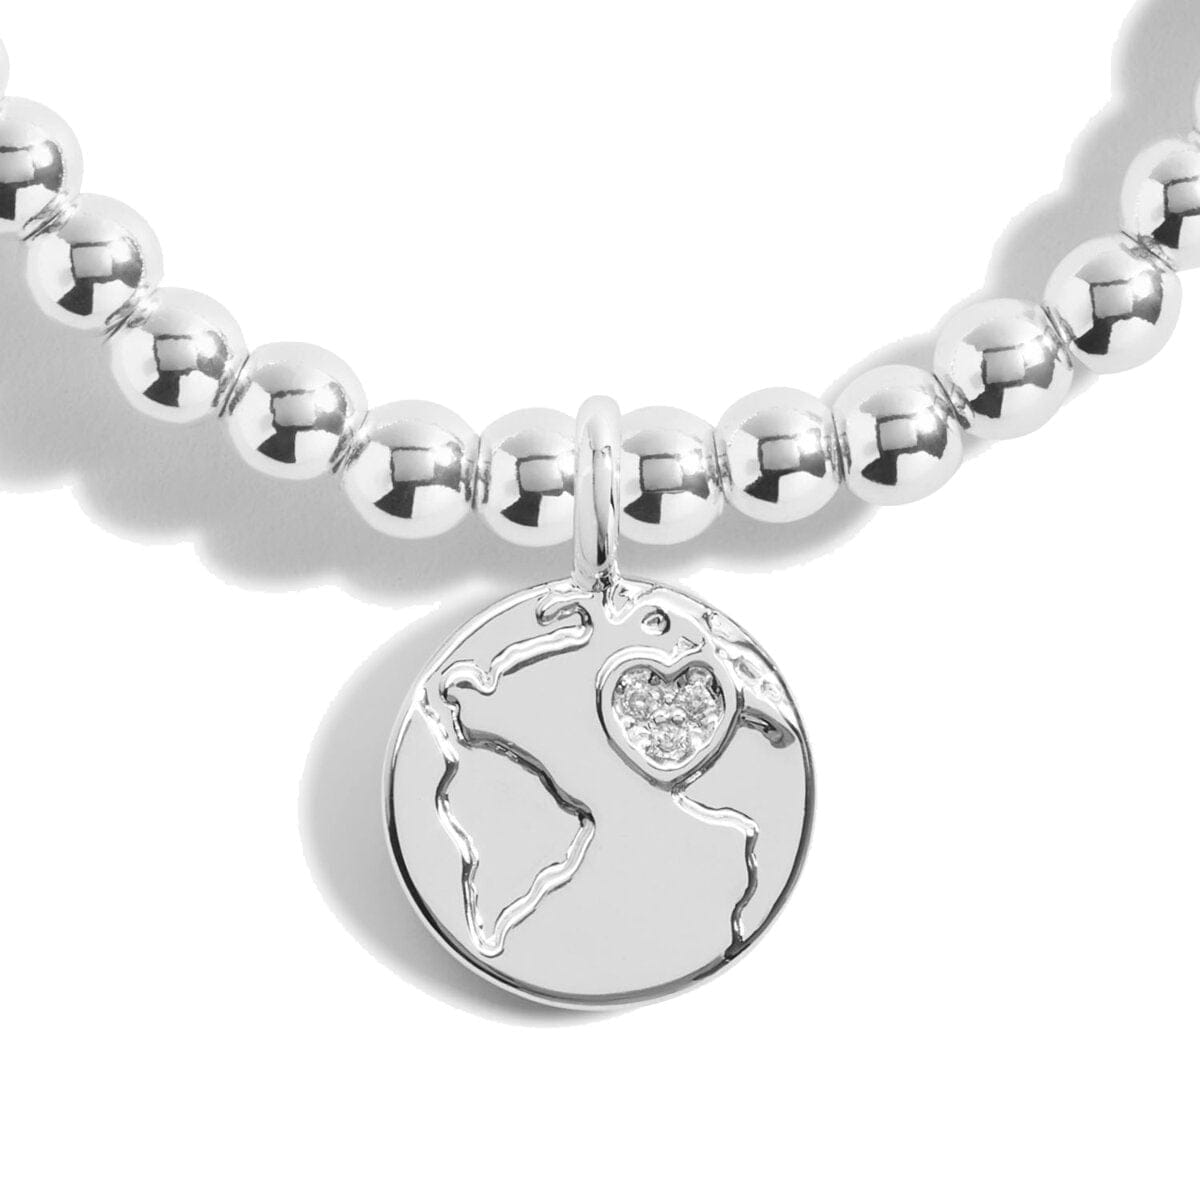 Joma Jewellery Bracelet Joma Jewellery Bracelet - A Little You Mean The World To Me